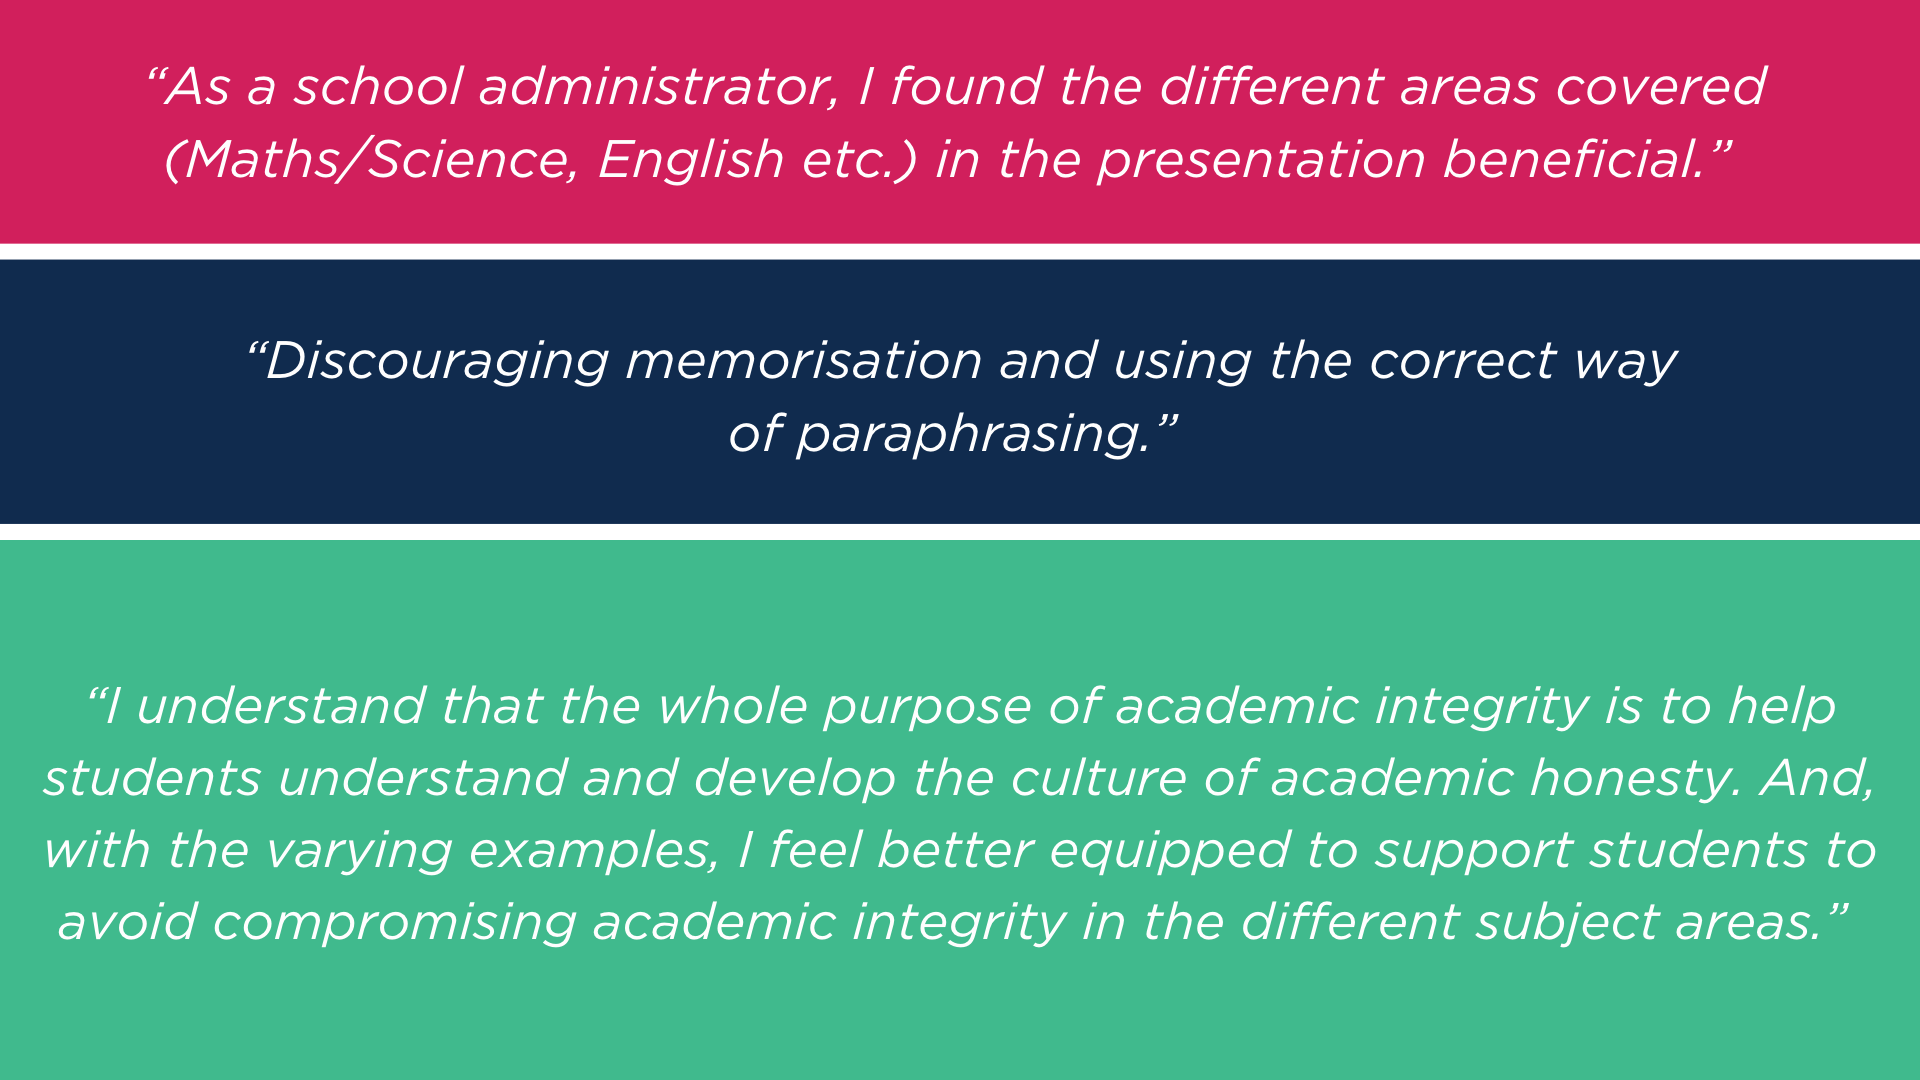 Three quotes in red, blue and green about what teachers learned from the PD workshops